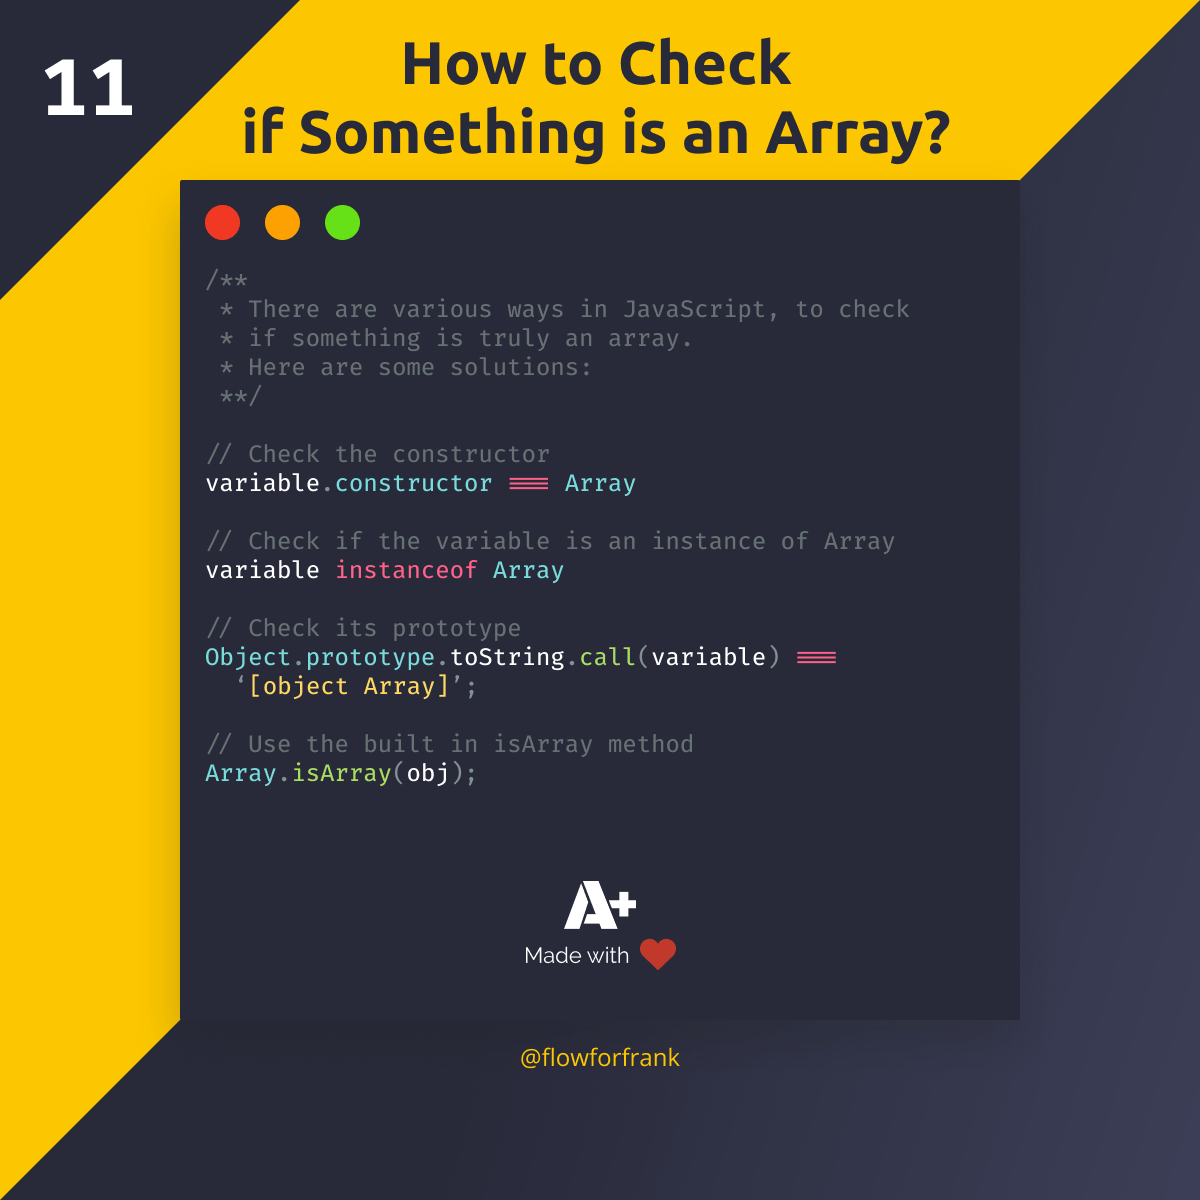 How to Check if Something is an Array?